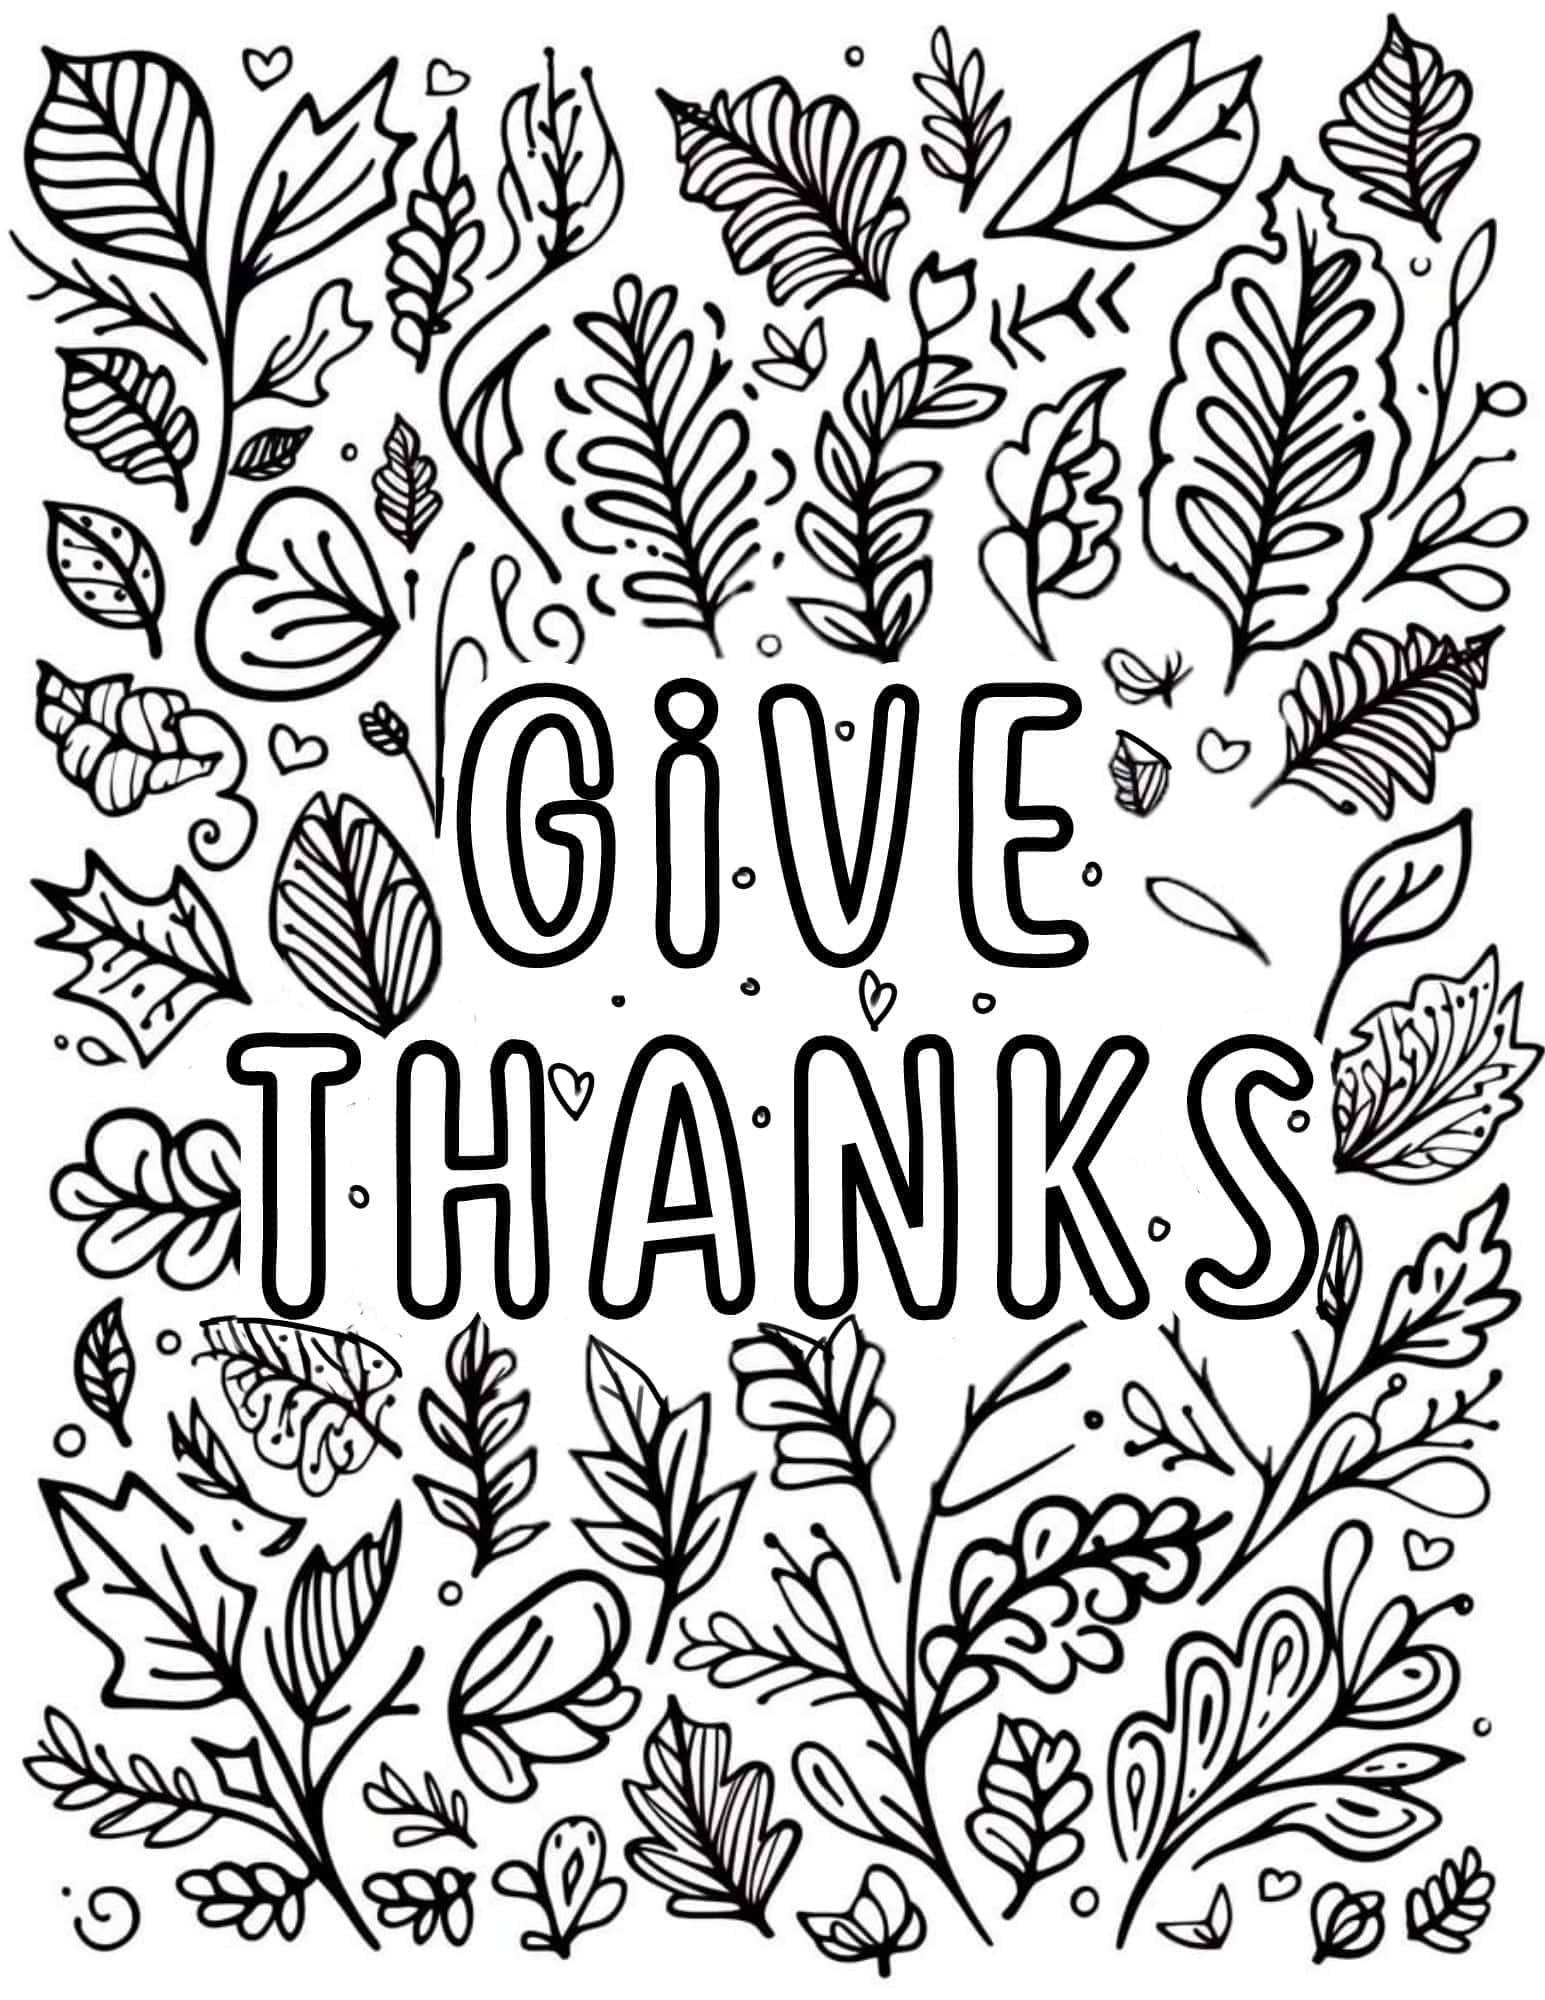 Thanksgiving coloring pages for kids and adults